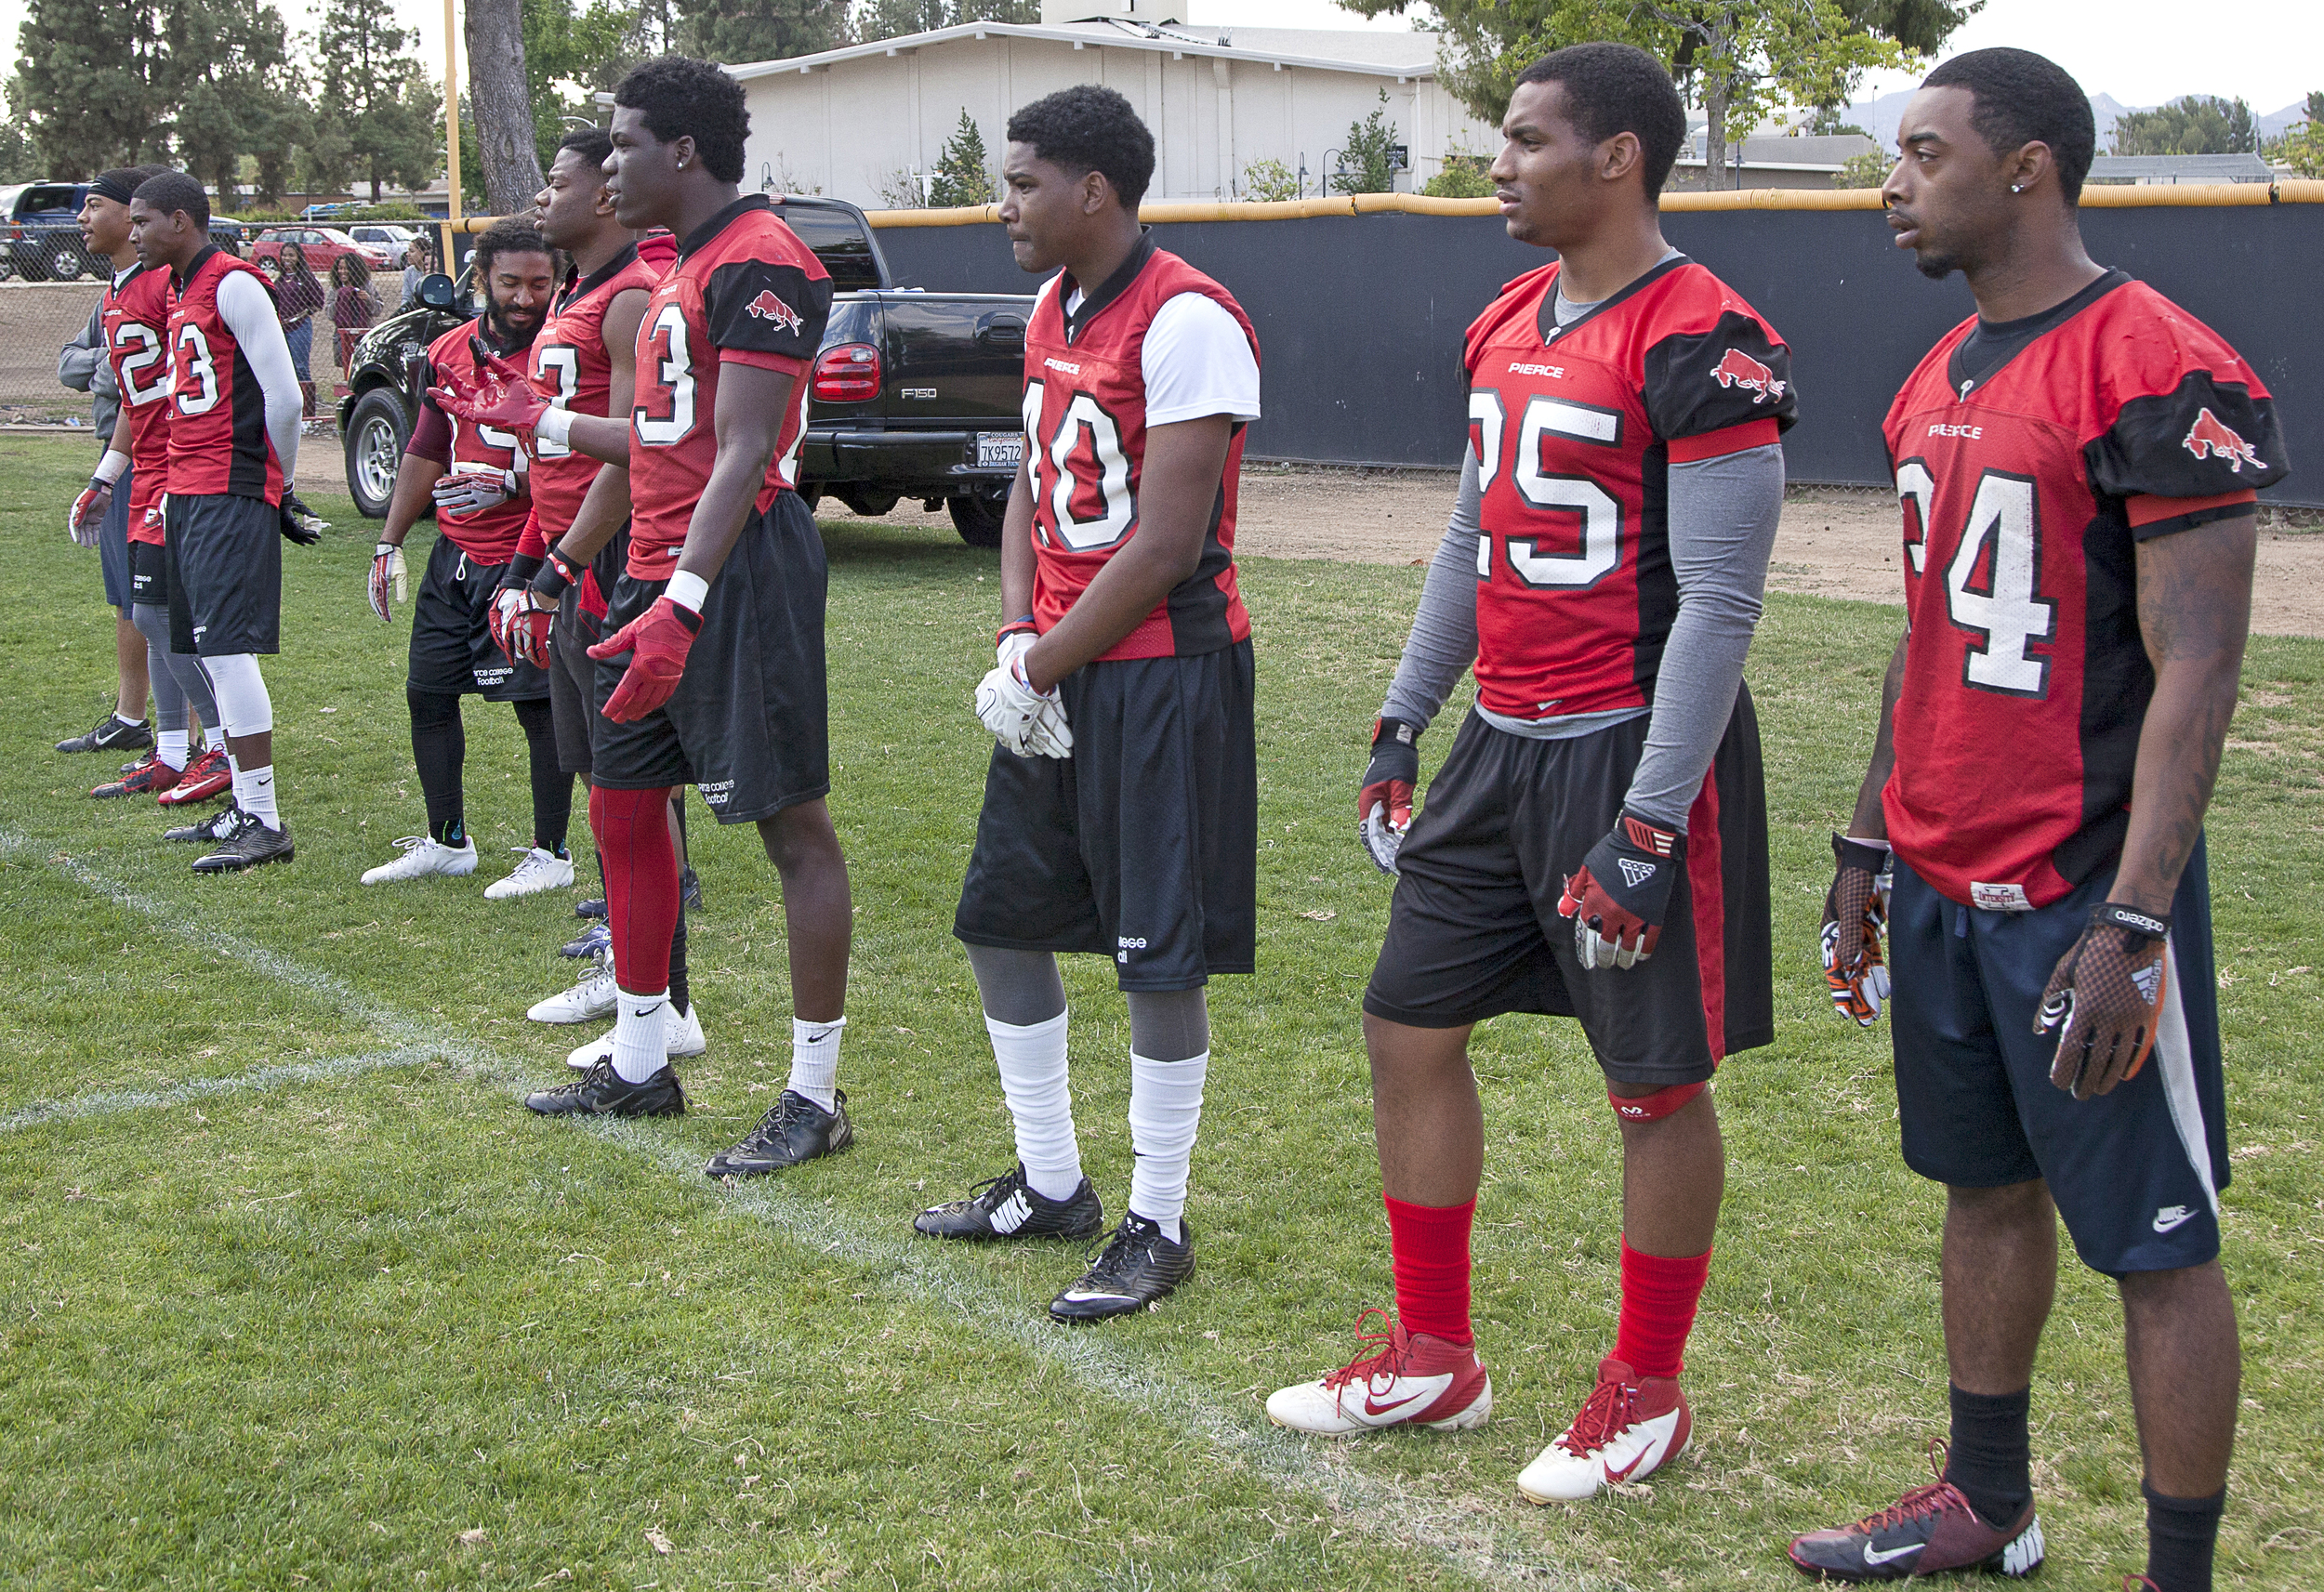  The defensive team observe from the sidelines as the offensive and defensive team scrimmage during an offseason spring practice session on Thursday, May 21, 2015. Woodland Hills, Calif.&nbsp; 